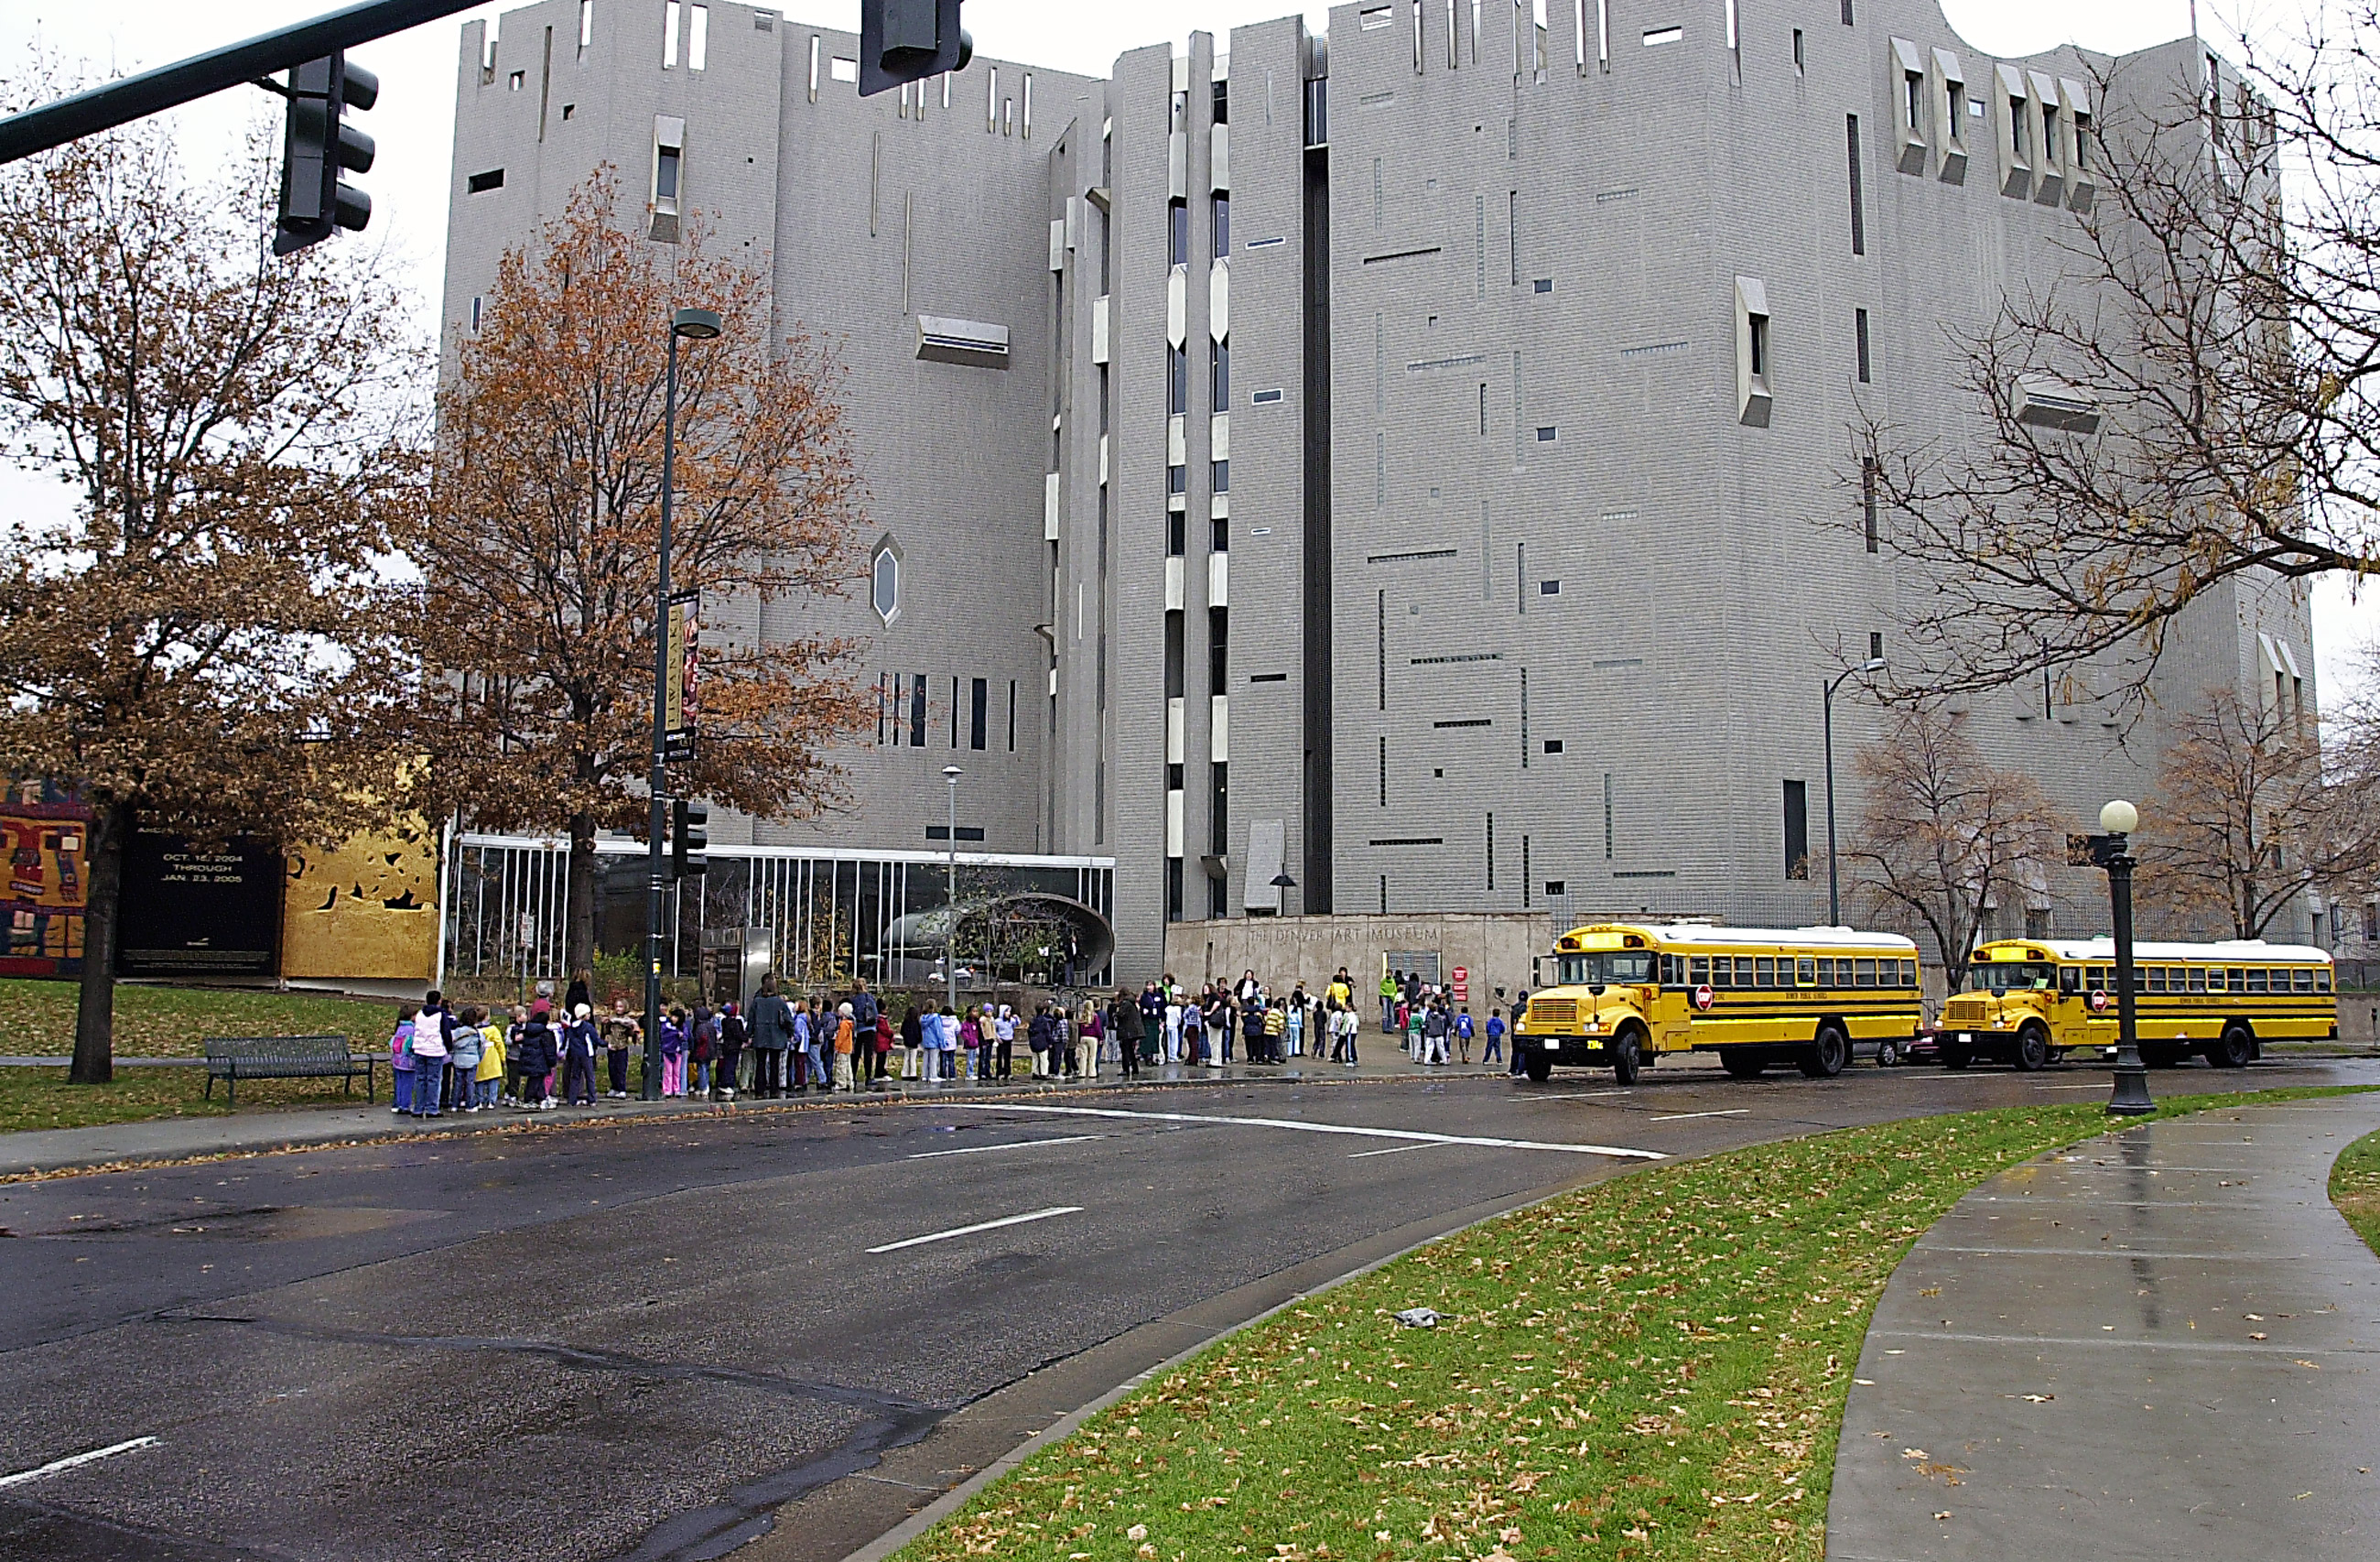 Kids and buses arriving at the museum for a field trip